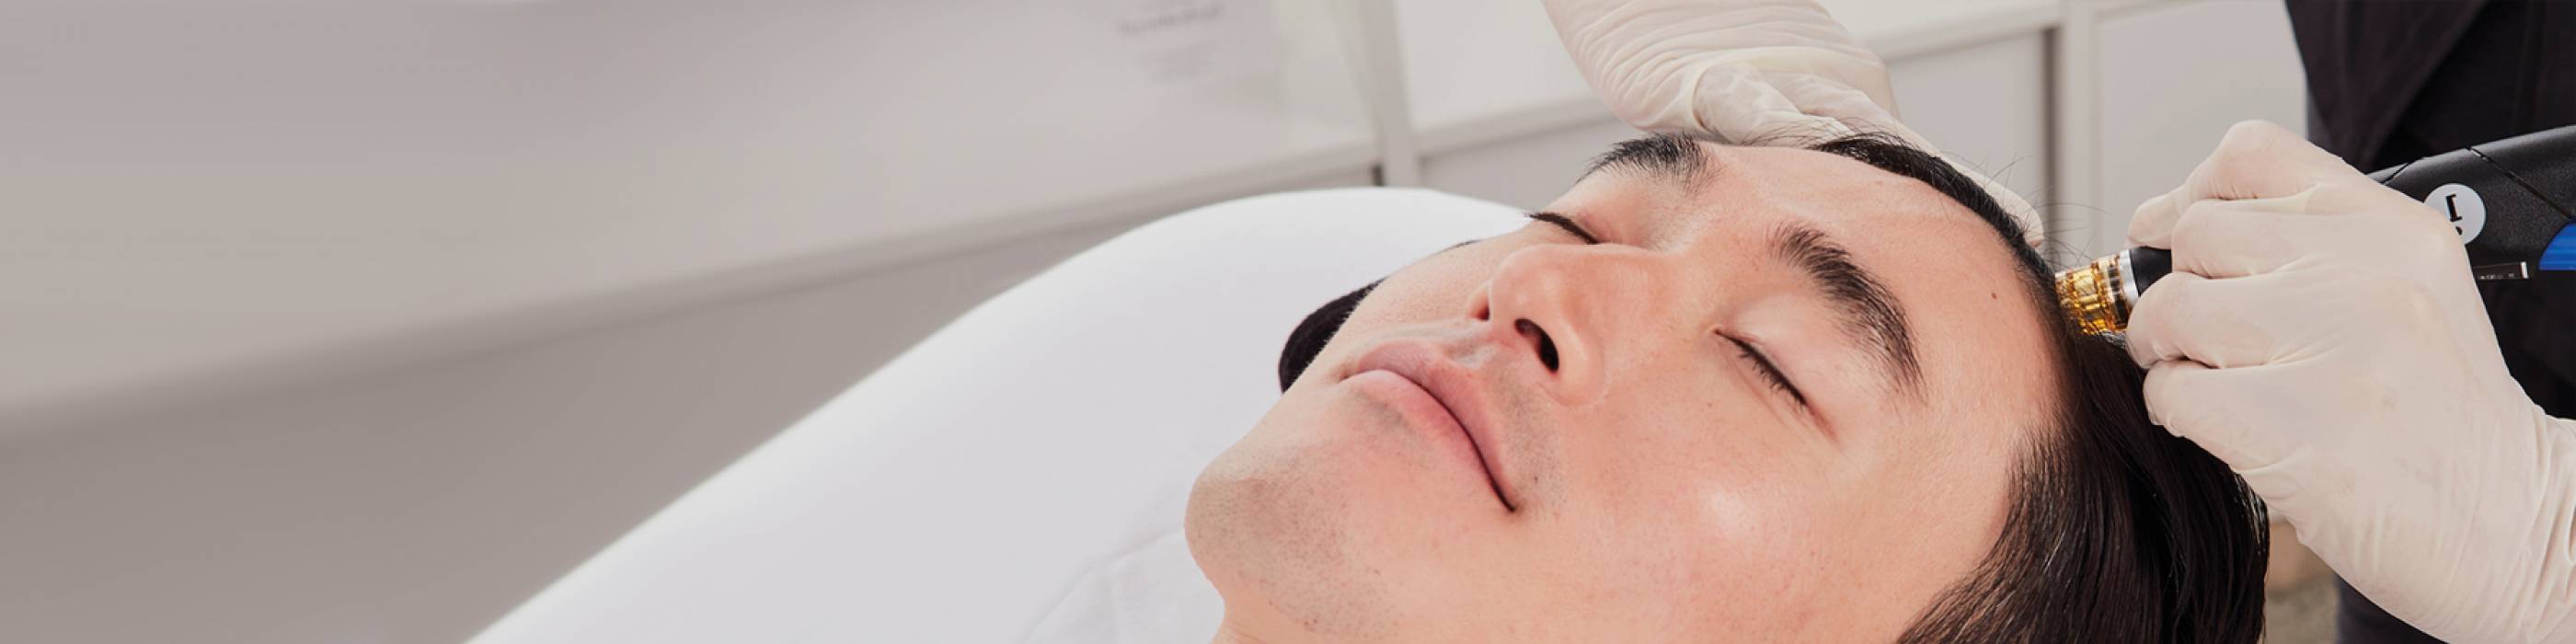 Close shot of a relaxed man with eyes closed undergoing HydraFacial Keravive treatment on his scalp to help regrow hair